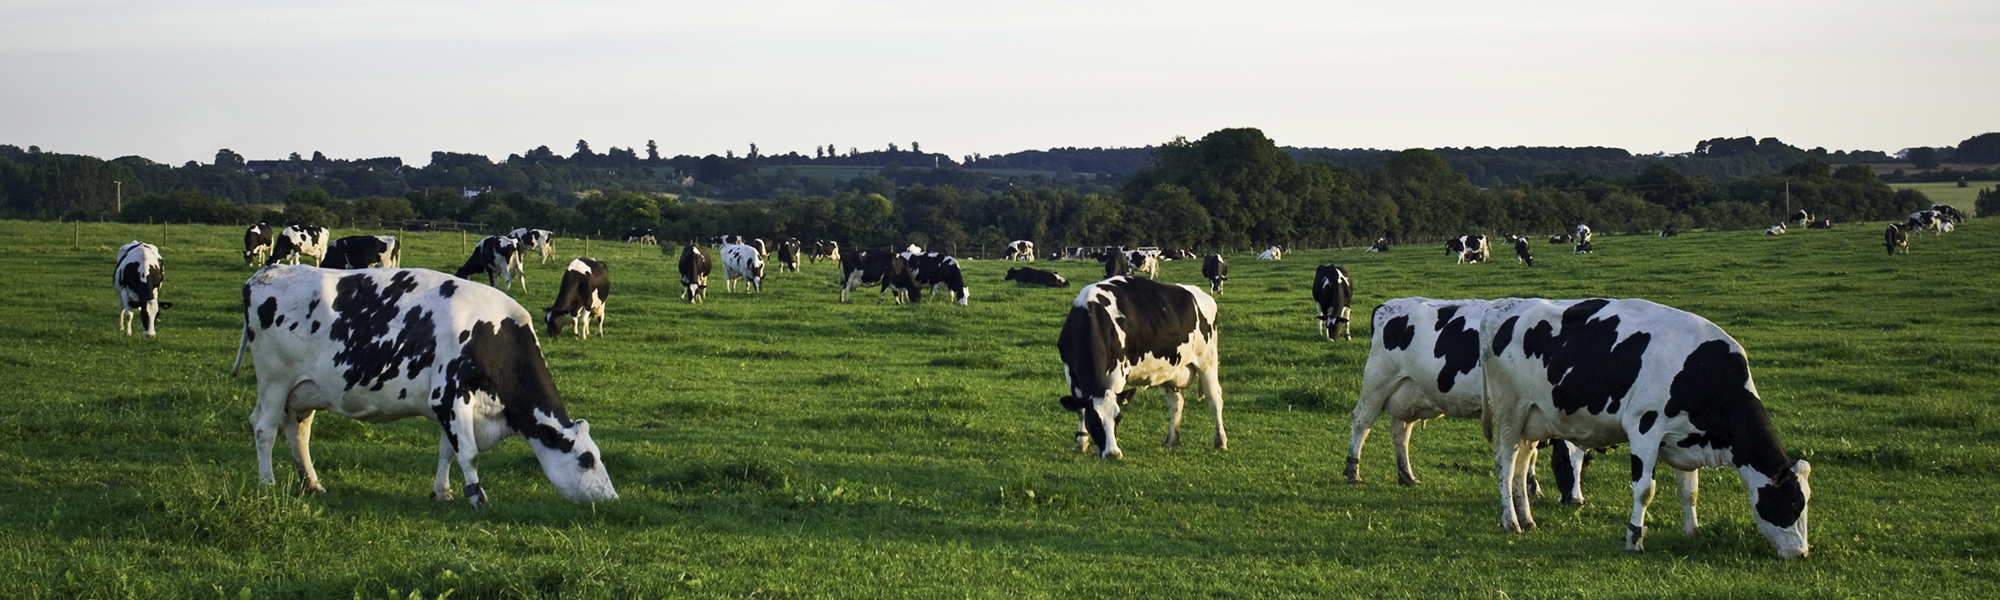 A photo of cows in a pasture